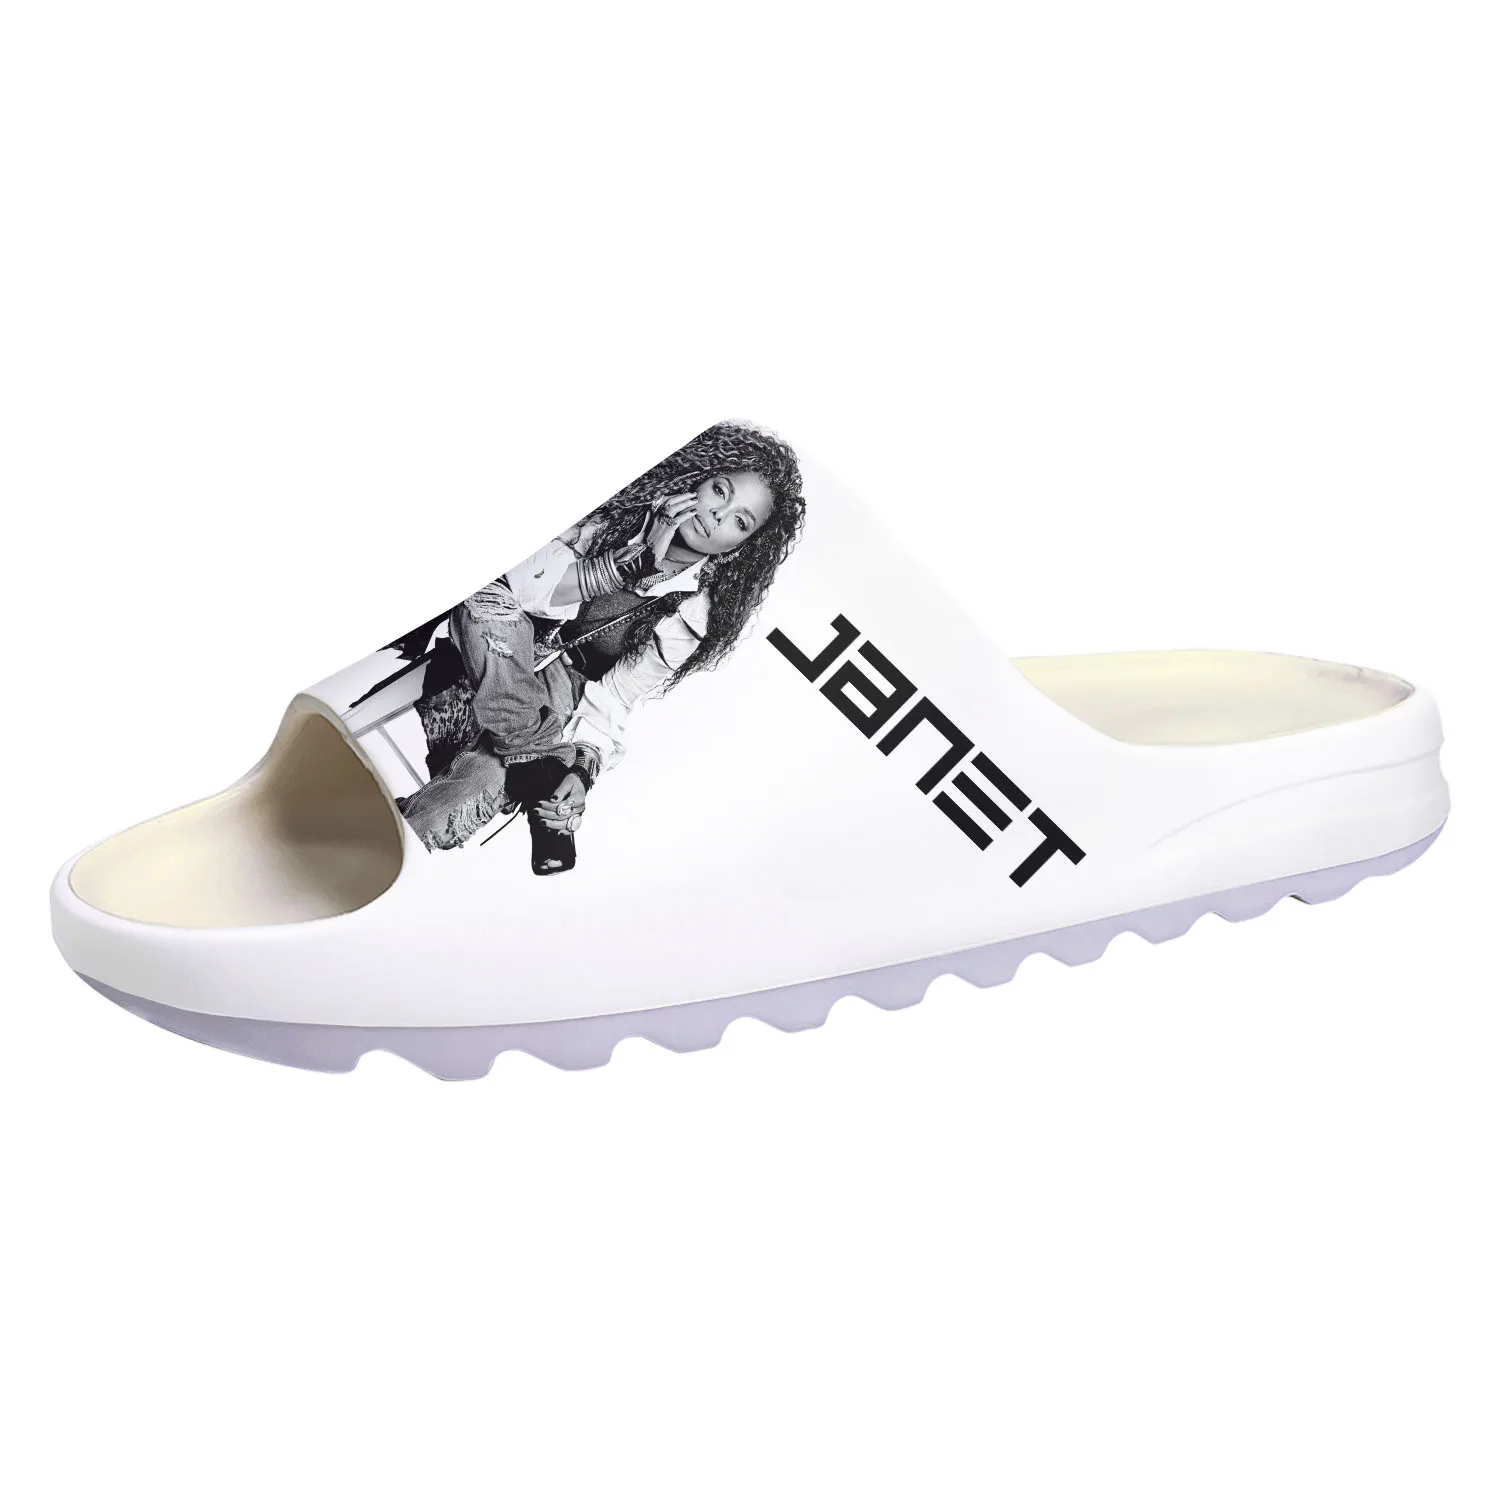 

Janet Jackson Singer Soft Sole Sllipers Home Clogs Step on Water Shoes Mens Womens Teenager Bathroom Customize on Shit Sandals